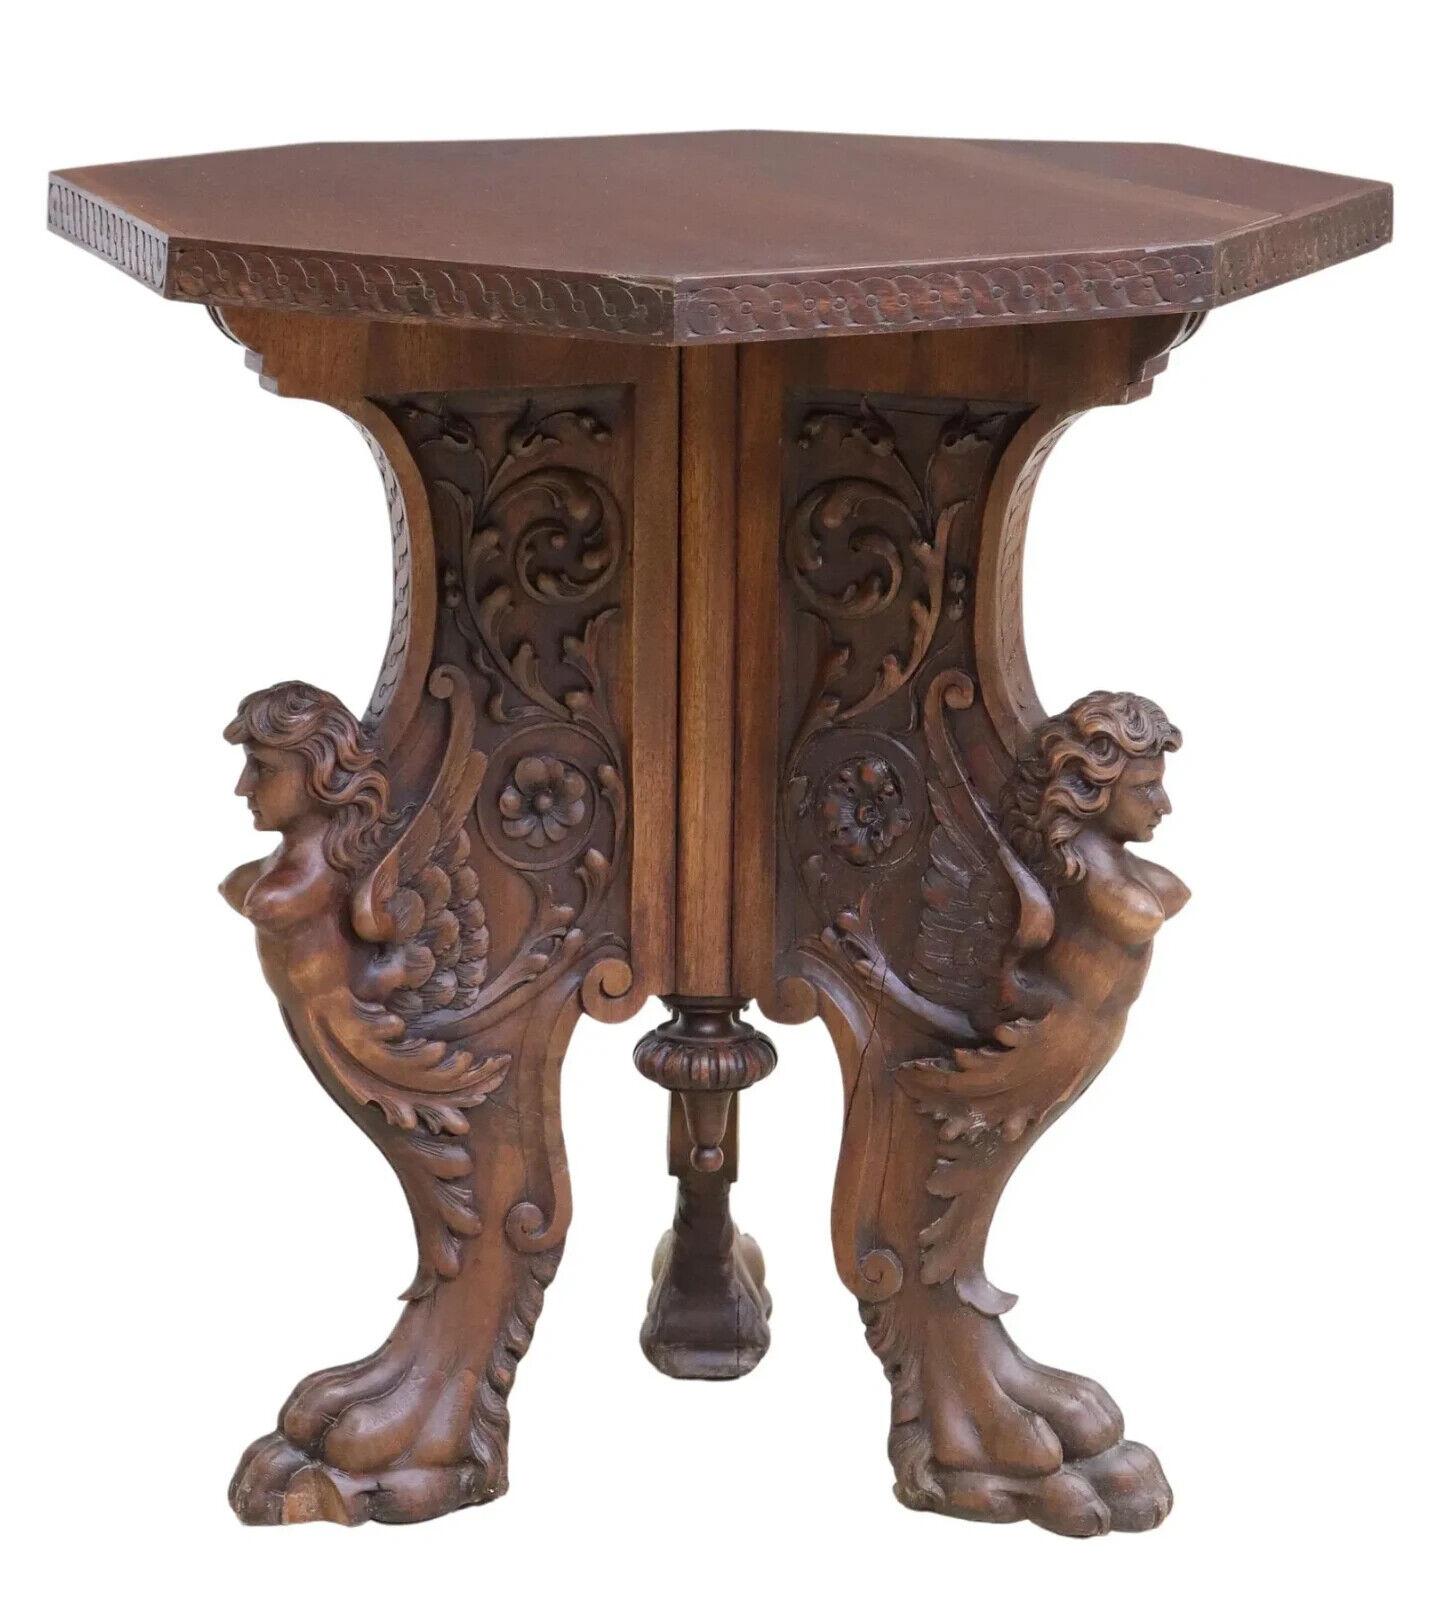 
Gorgeous Table, Center, Italian Renaissance Revival, Carved  Walnut, Tripod, 19th / 20th Century!!

This antique center table features exquisite carvings and is a beautiful addition to any room. With its dark wood tones and Italian Renaissance